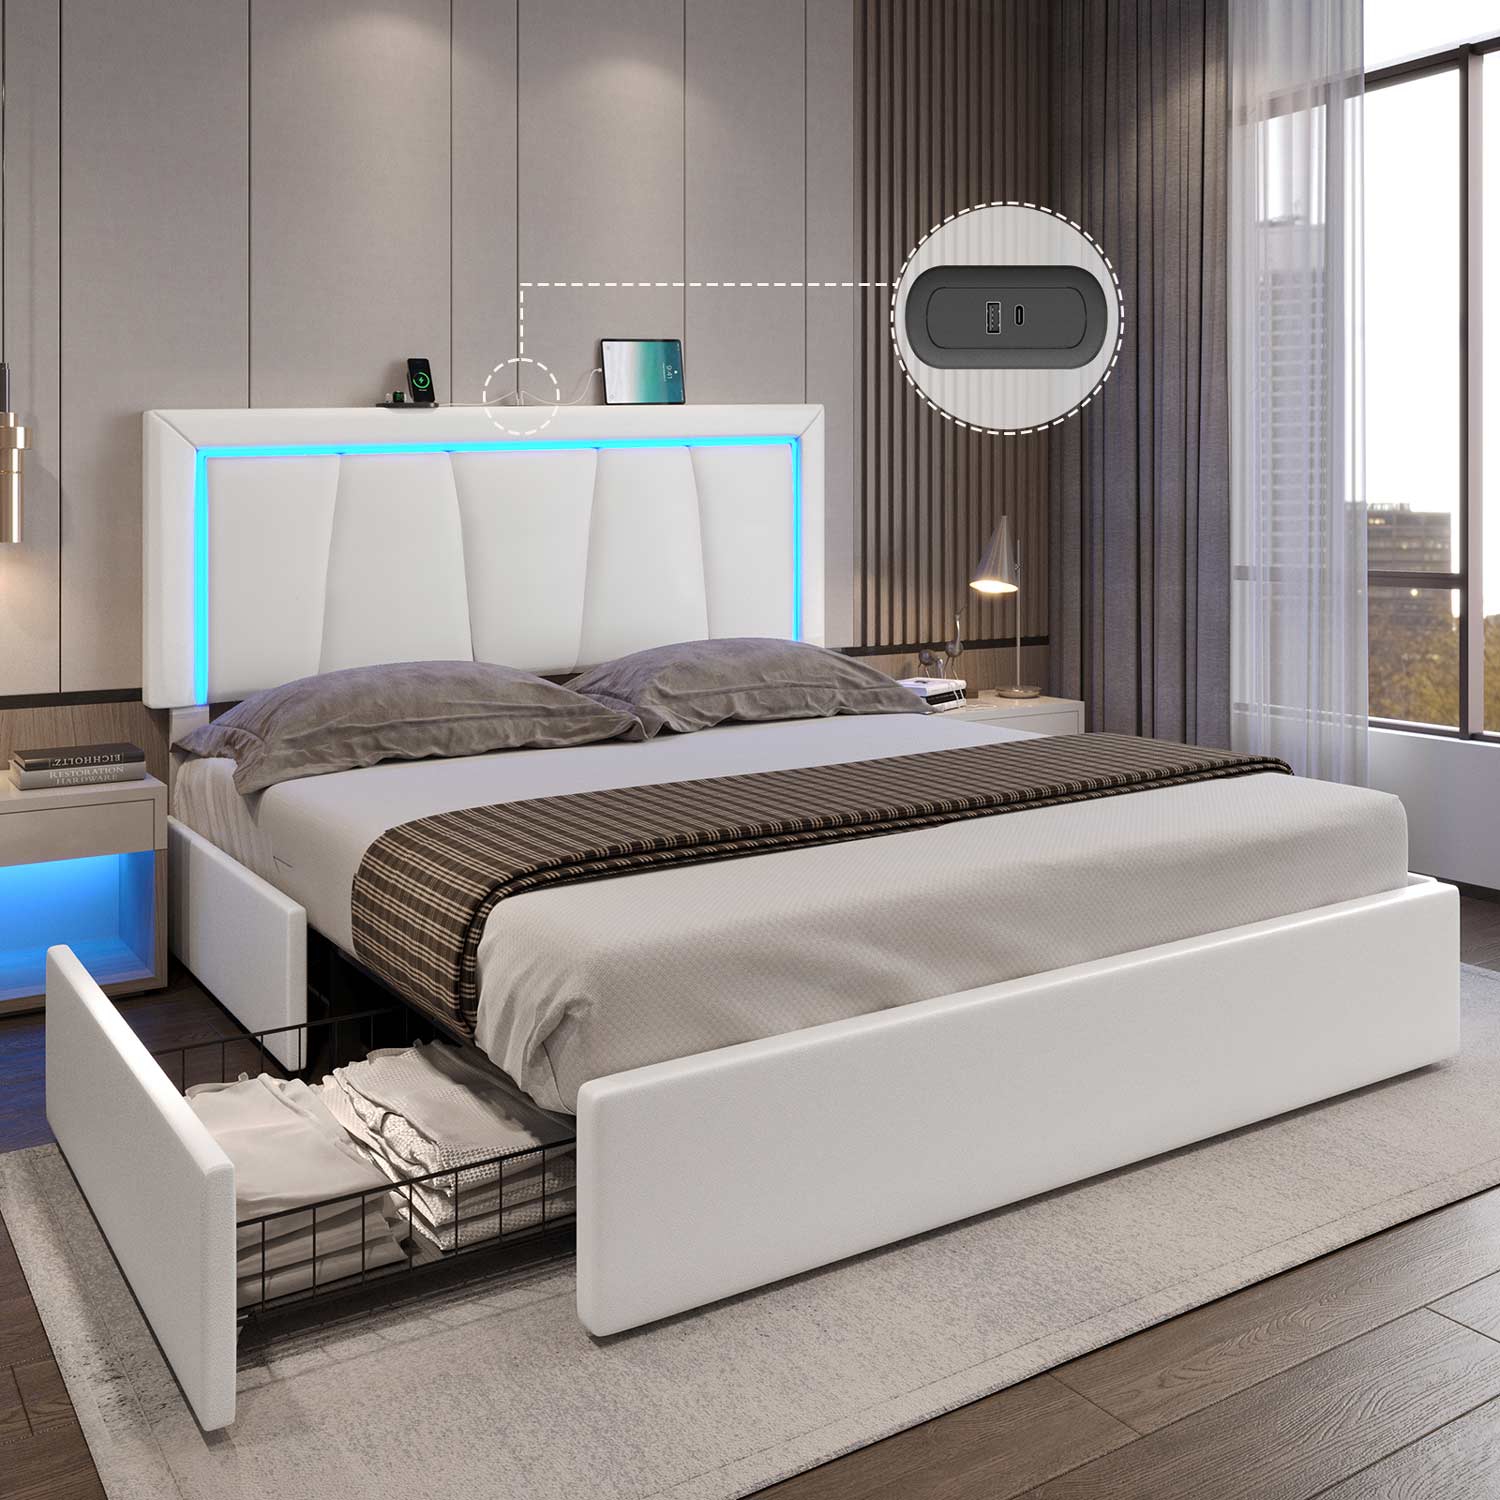 https://www.sikaic.com/cdn/shop/files/sikaic-beds-bed-frames-faux-leather-platform-led-bed-frame-with-storage-drawers-and-usb-ports-adjustable-headboard-white-43475910525236.jpg?v=1703407136